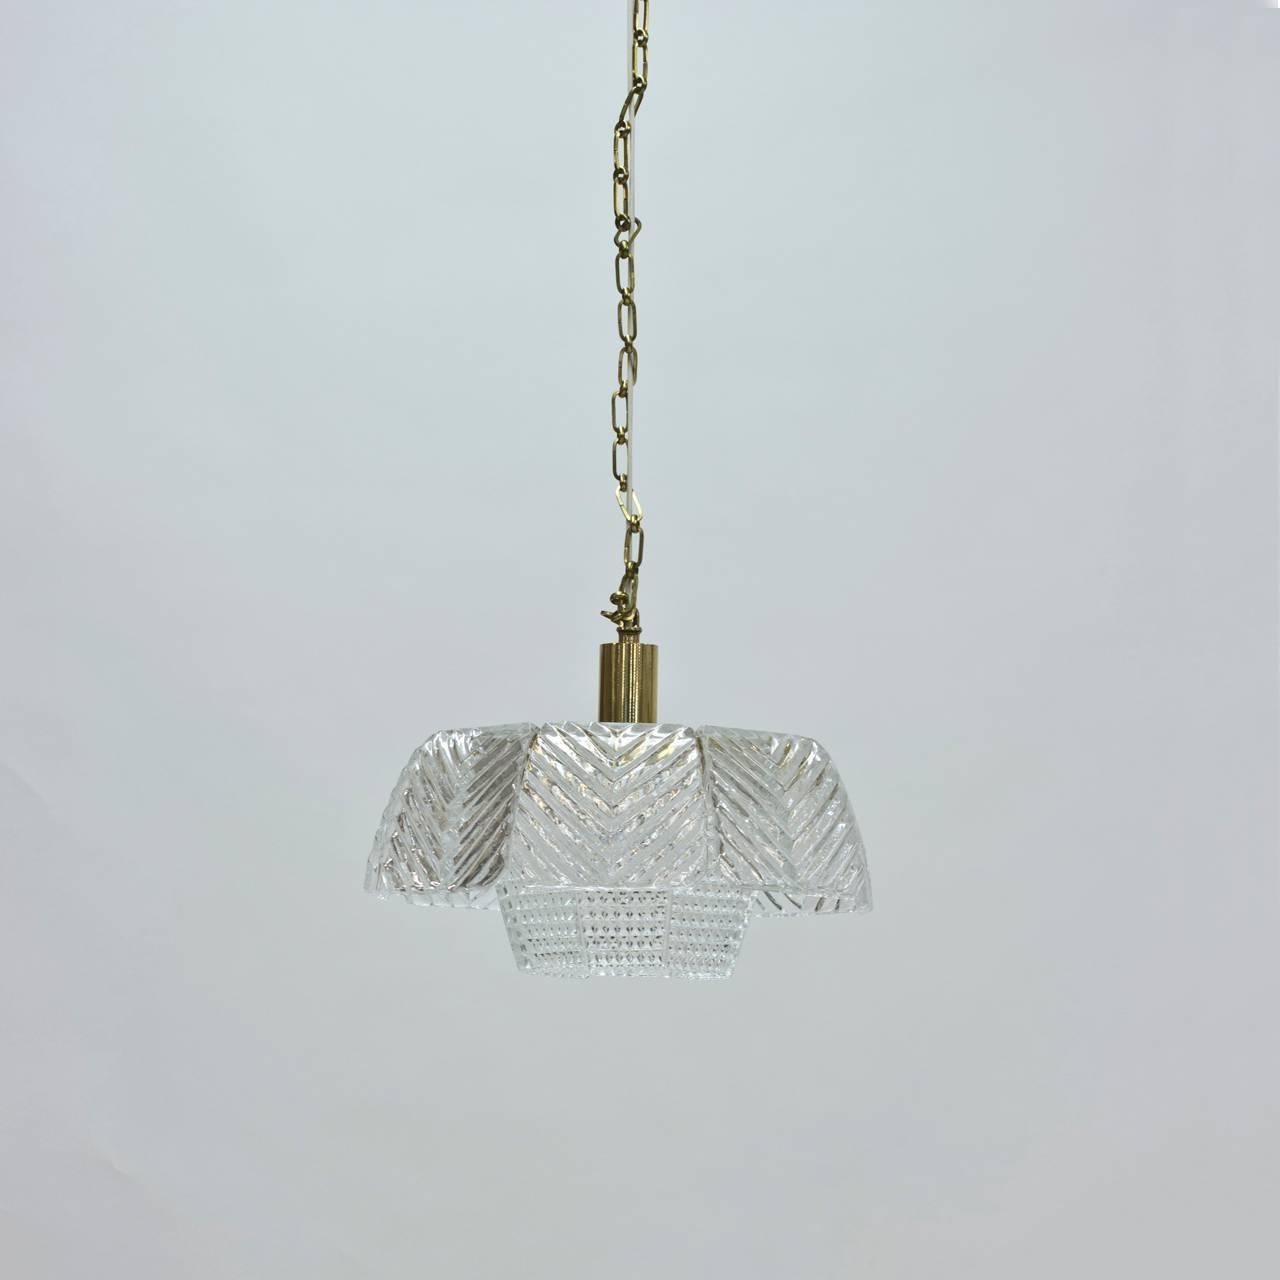 Elegant glass pendant lamp by Carl Fagerlund with organic glass in an angular 1960s design with the folded glass pieces hanging loose on the frame. The brass frame and chain create a modern contrast. New wiring.
Measures: Height 110 cm (including